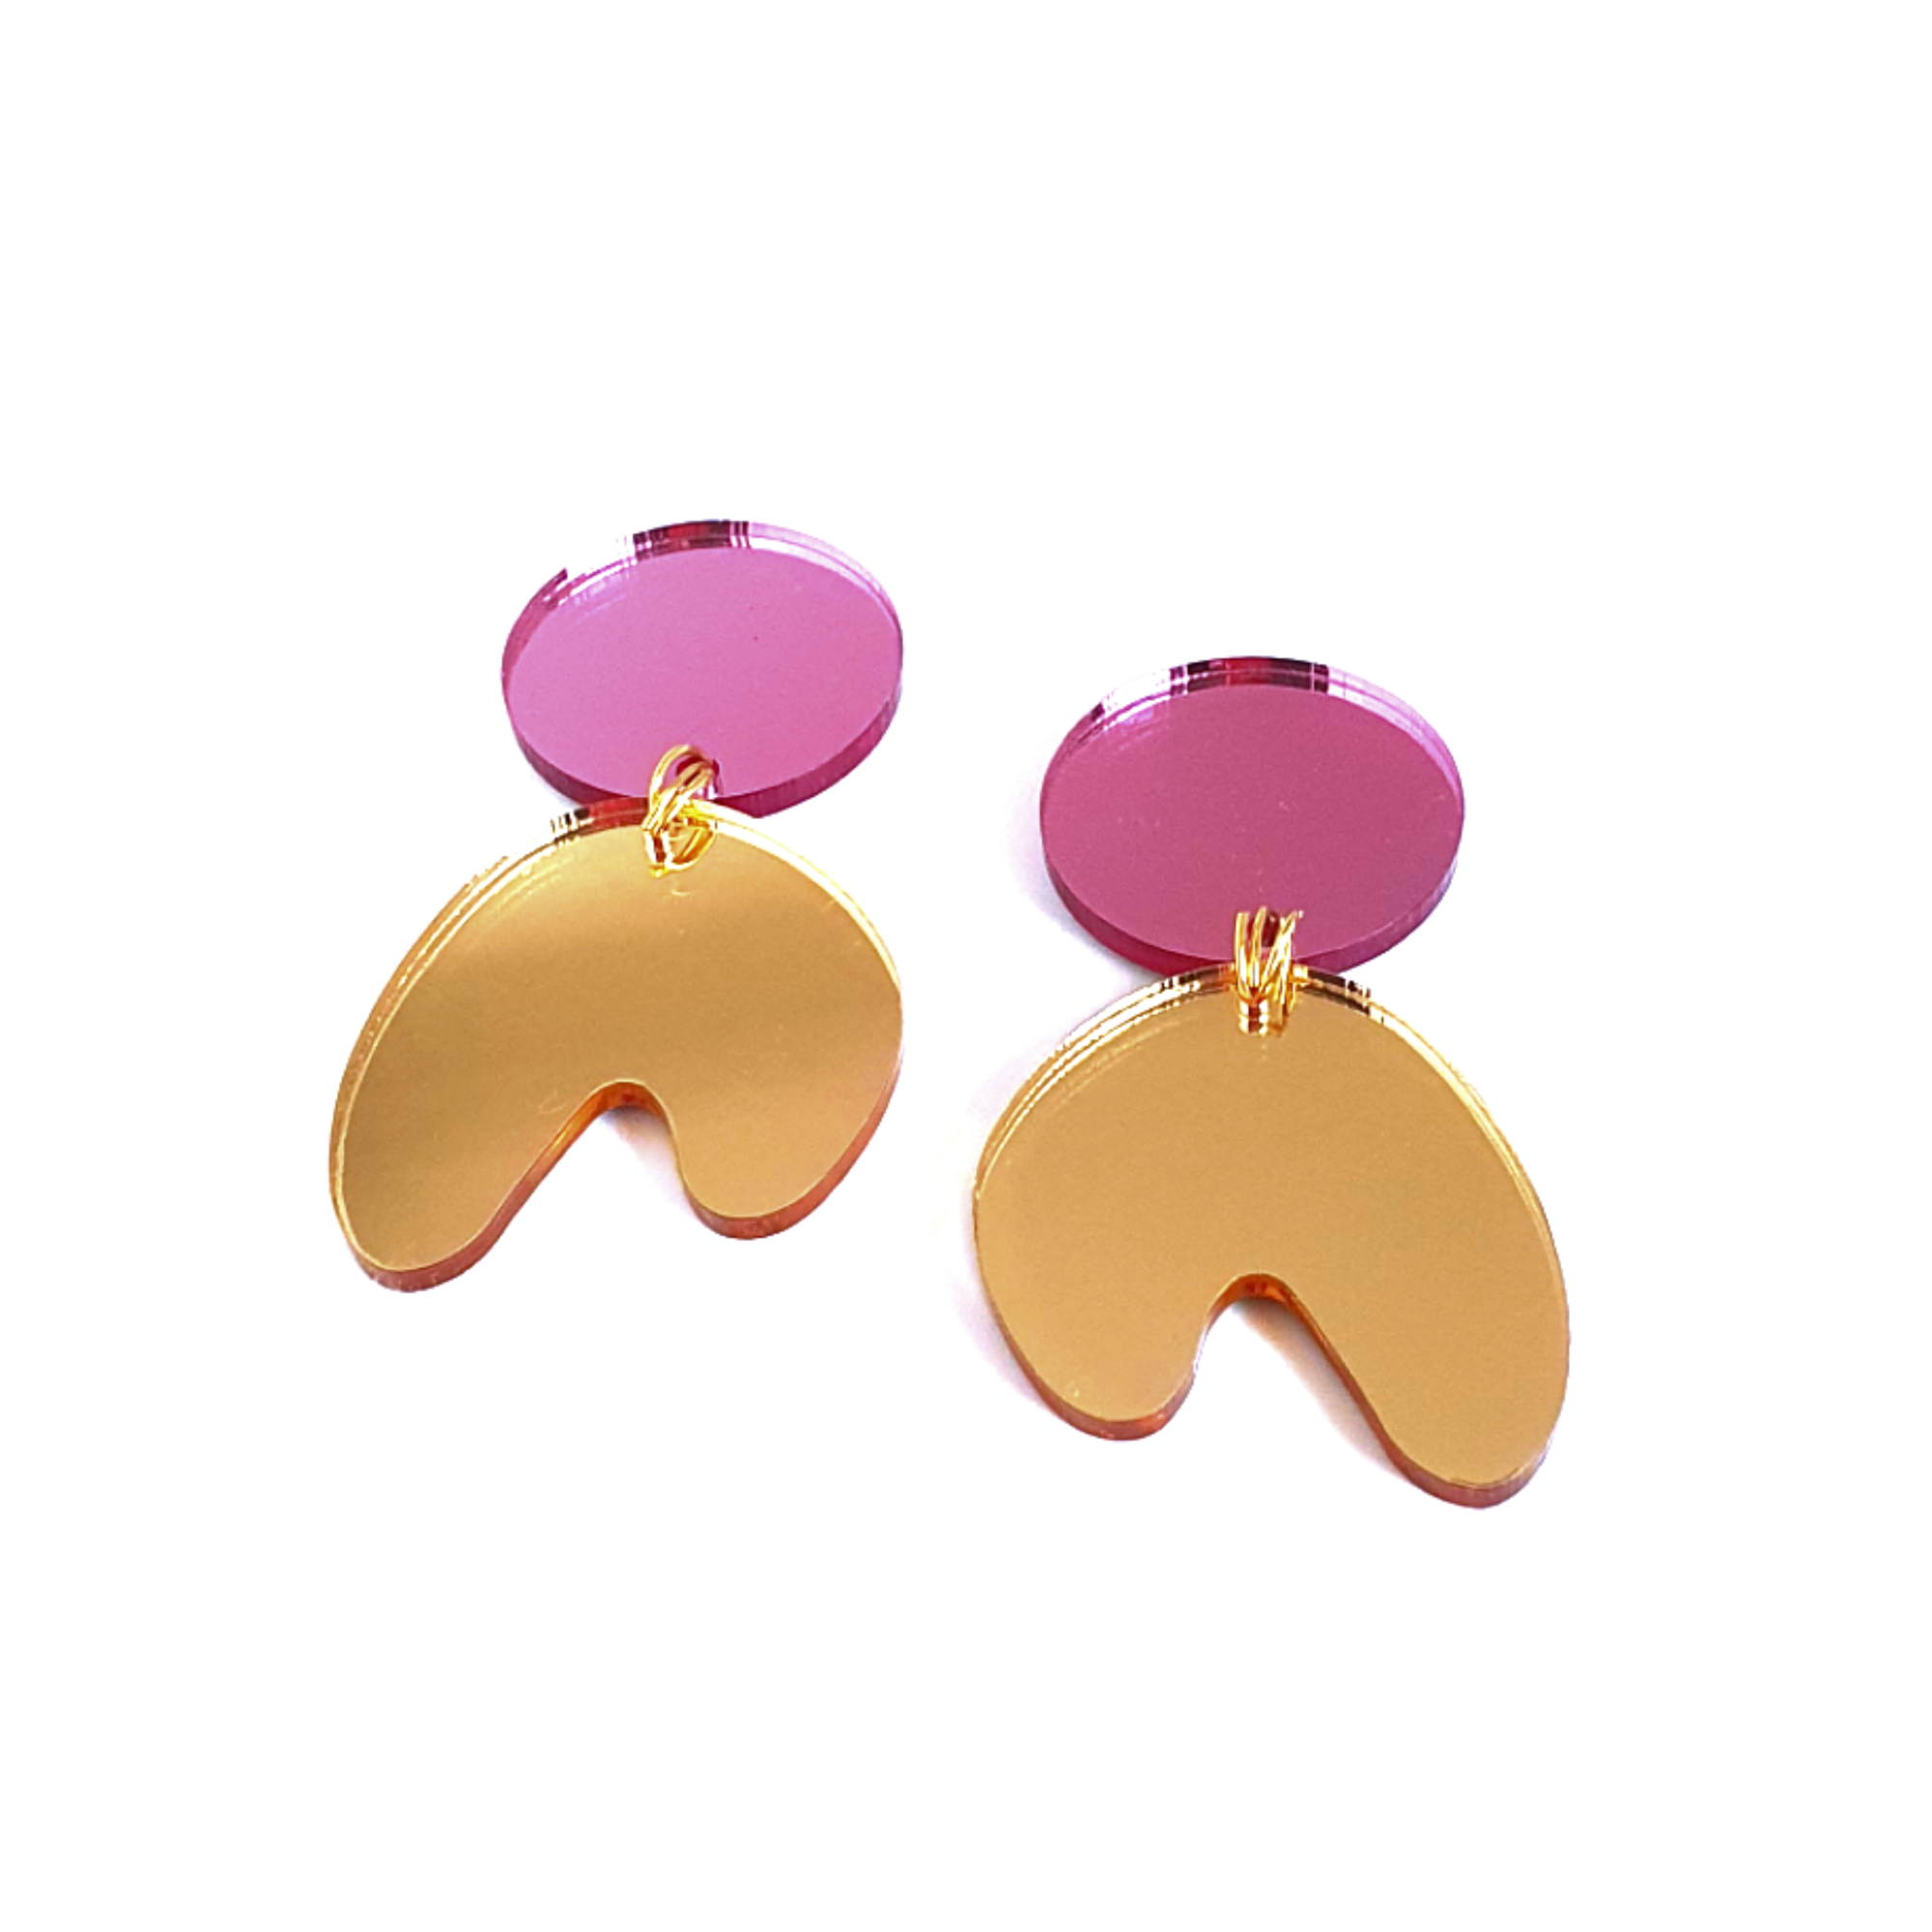 eve ray 'snobby party princess' earrings